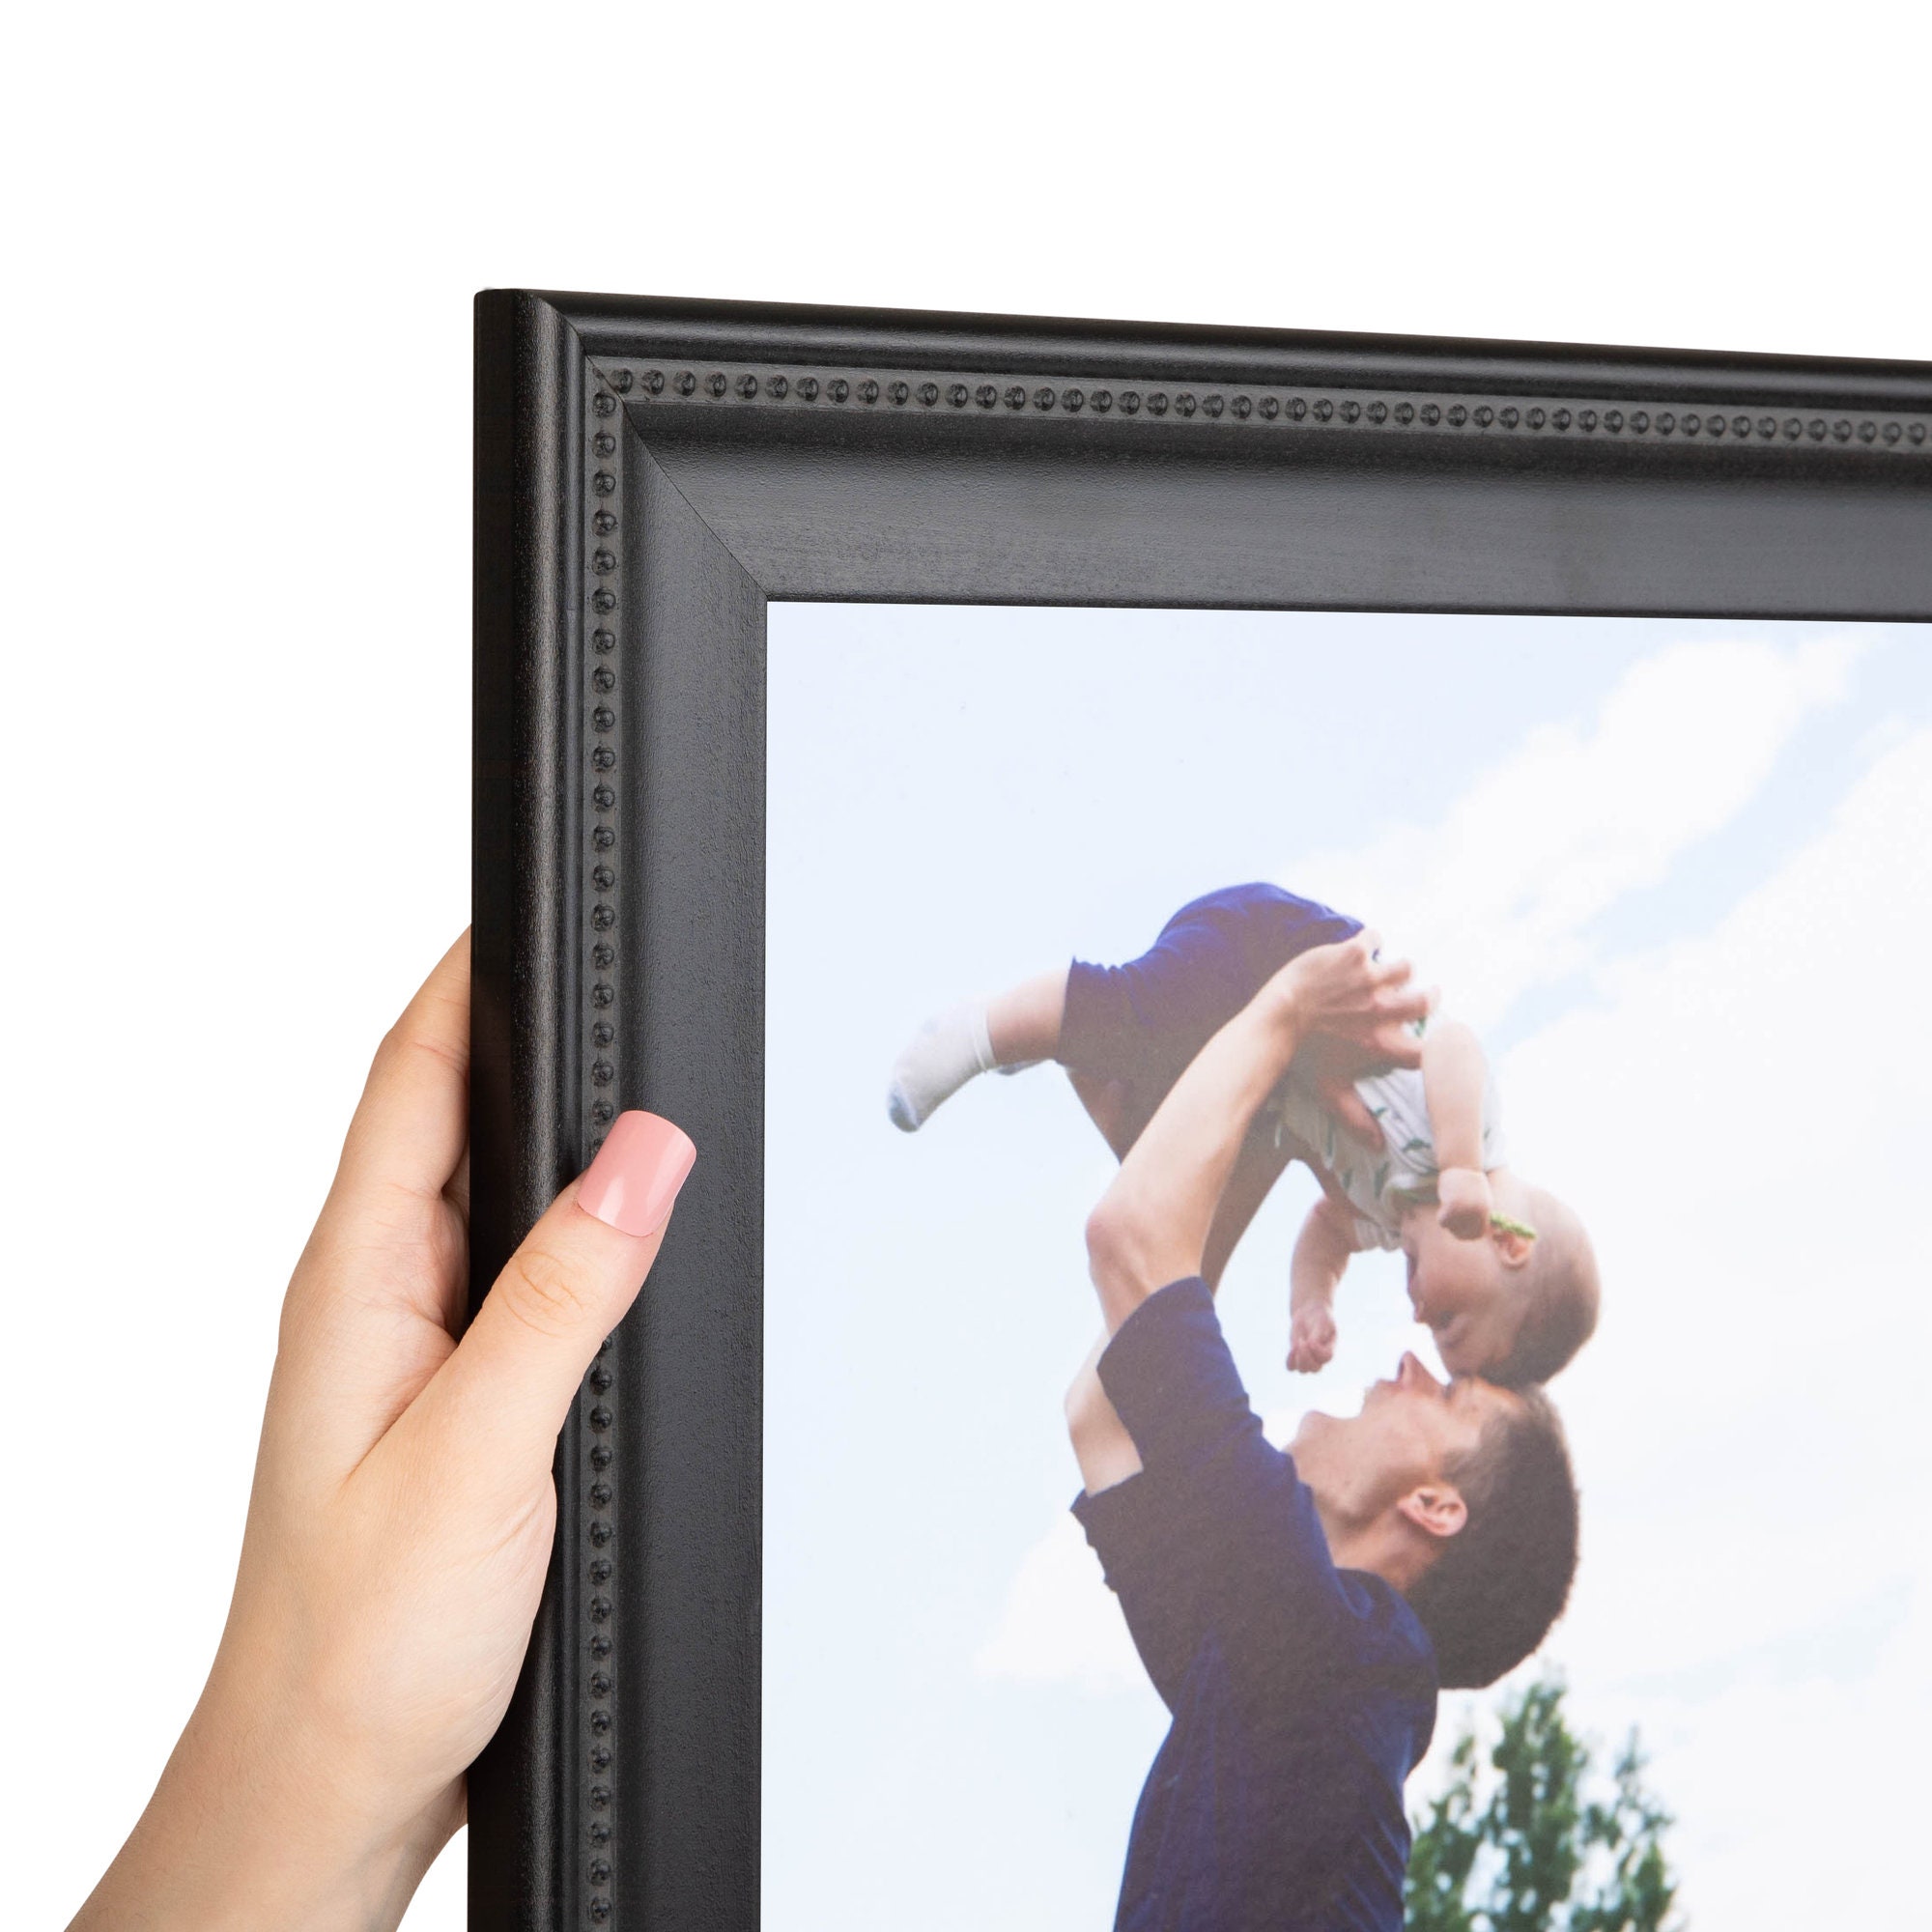 30x40 Photo Frame, Pet Picture Frame, Poster Frame, Baby Picture